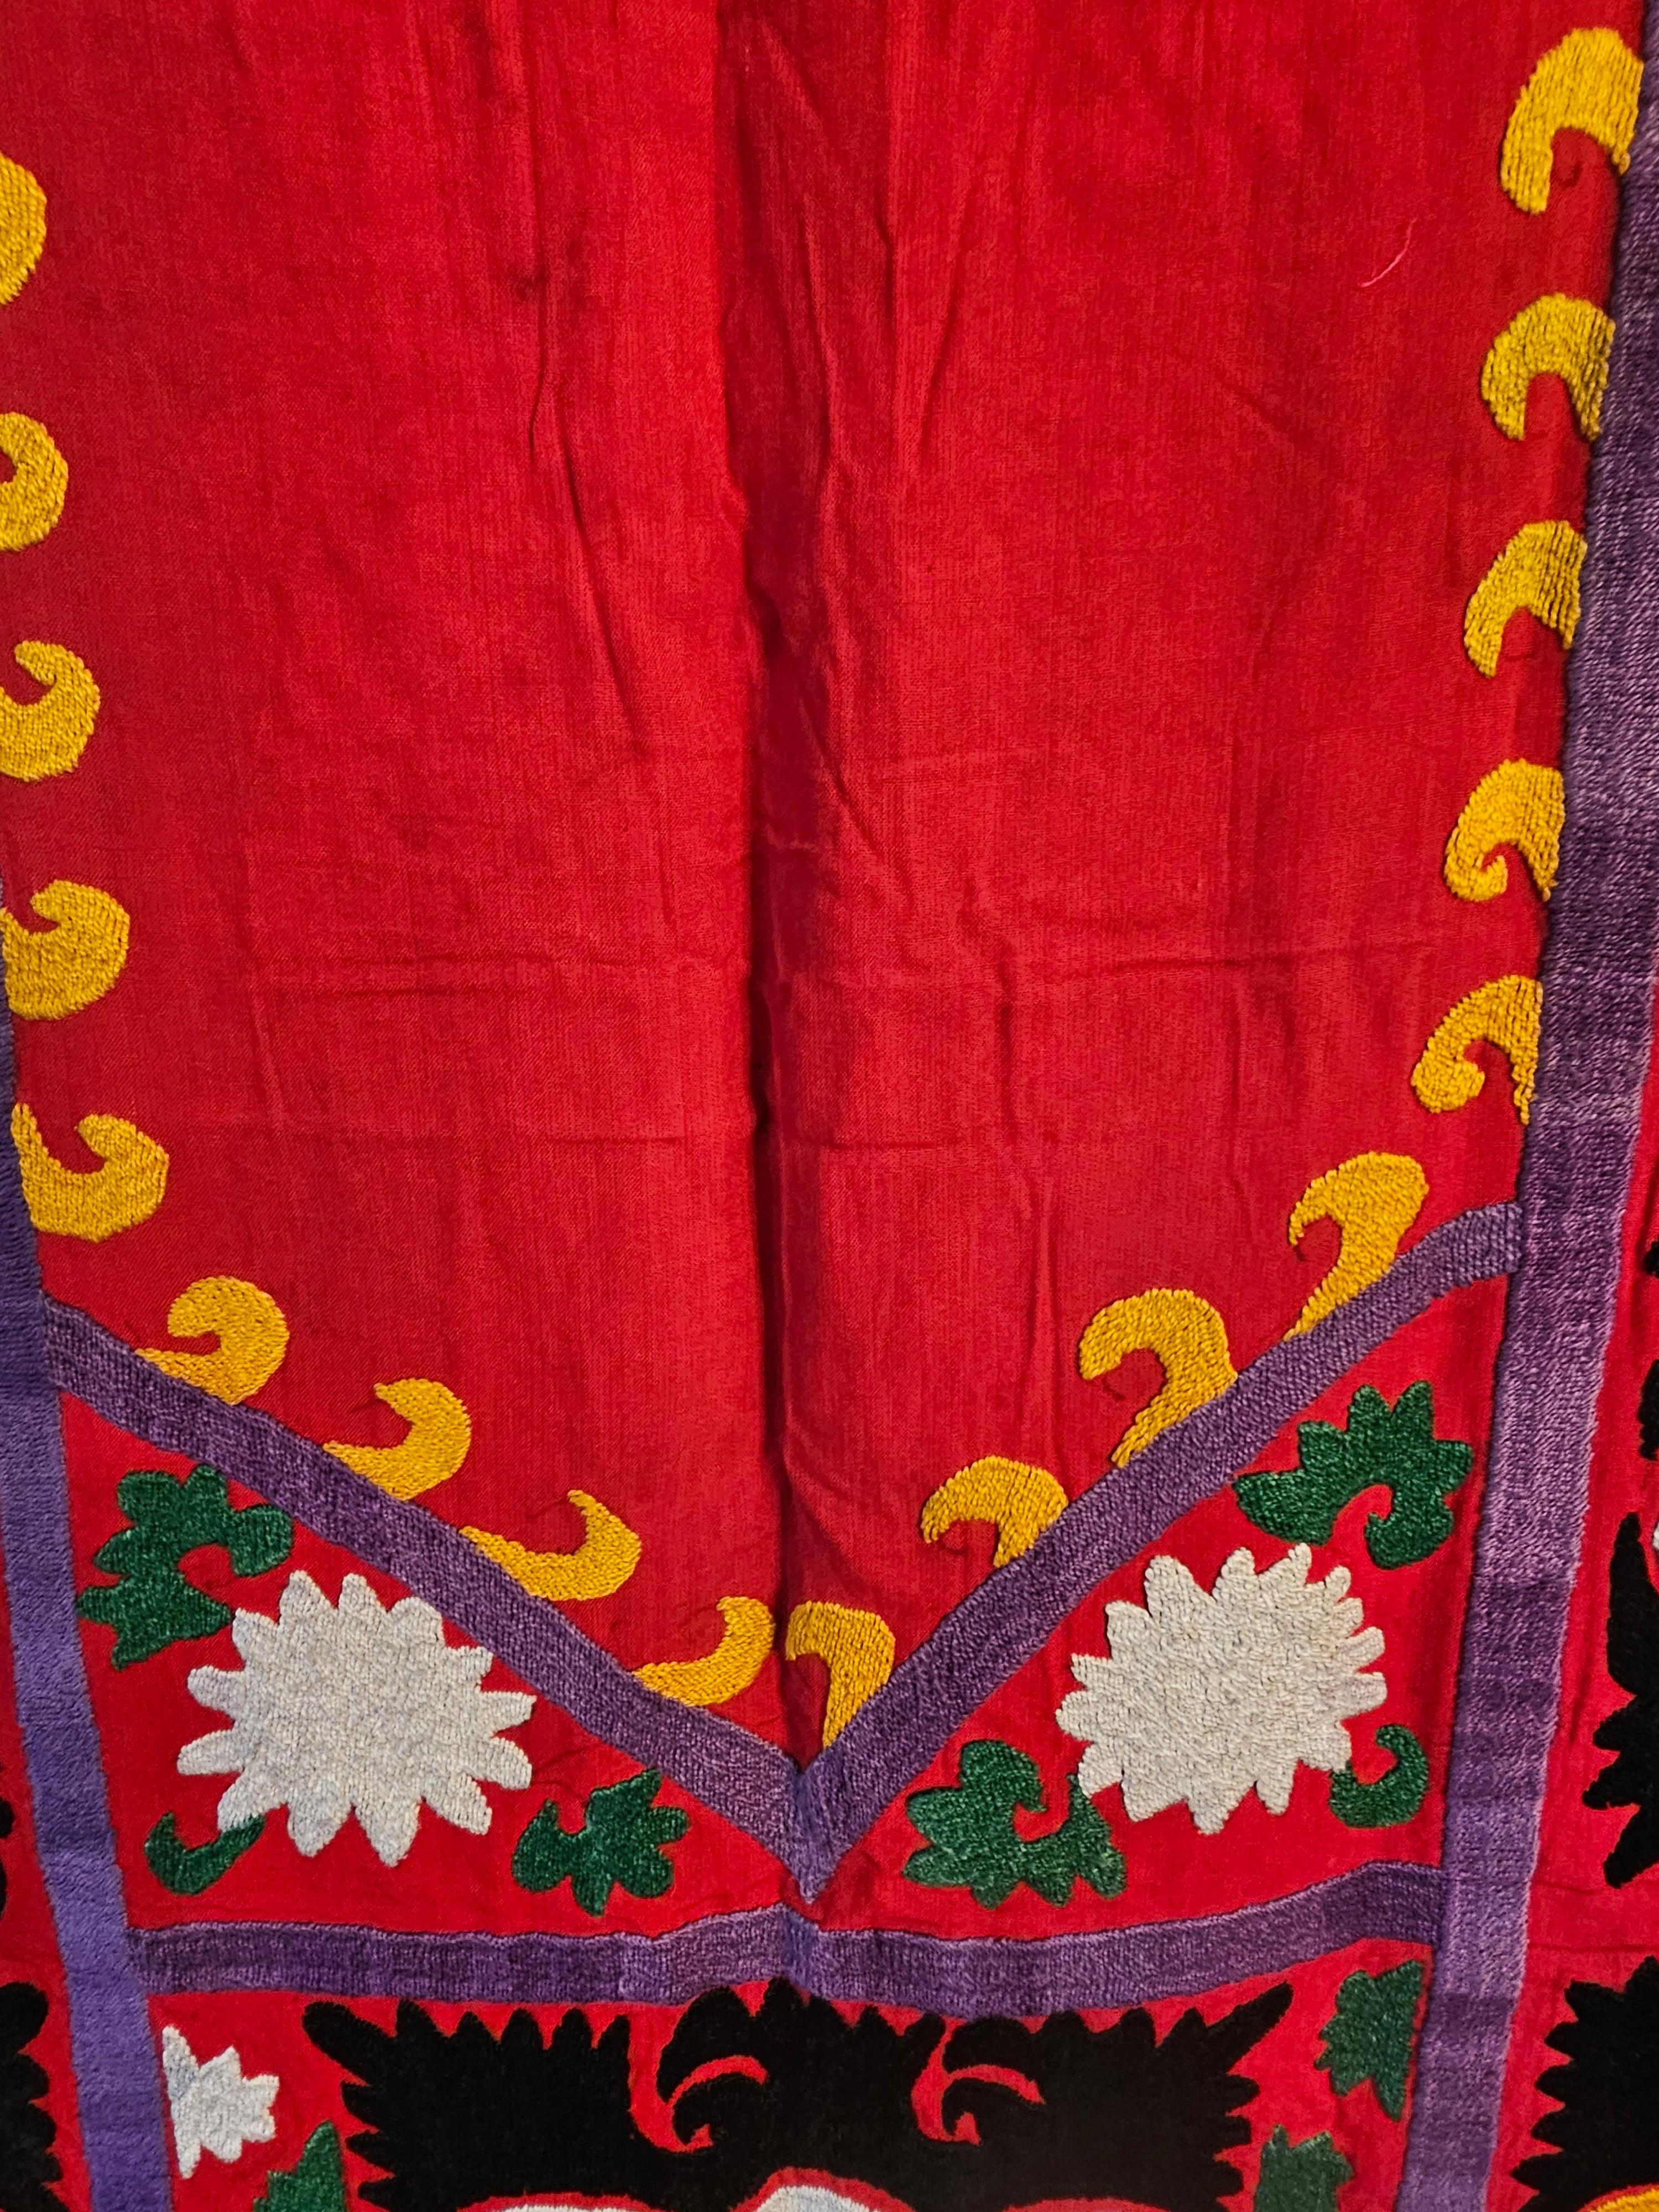 Early 20th century Samarkand, Uzbekistan made silk and cotton embroidery Prayer Hanging. Measures 40